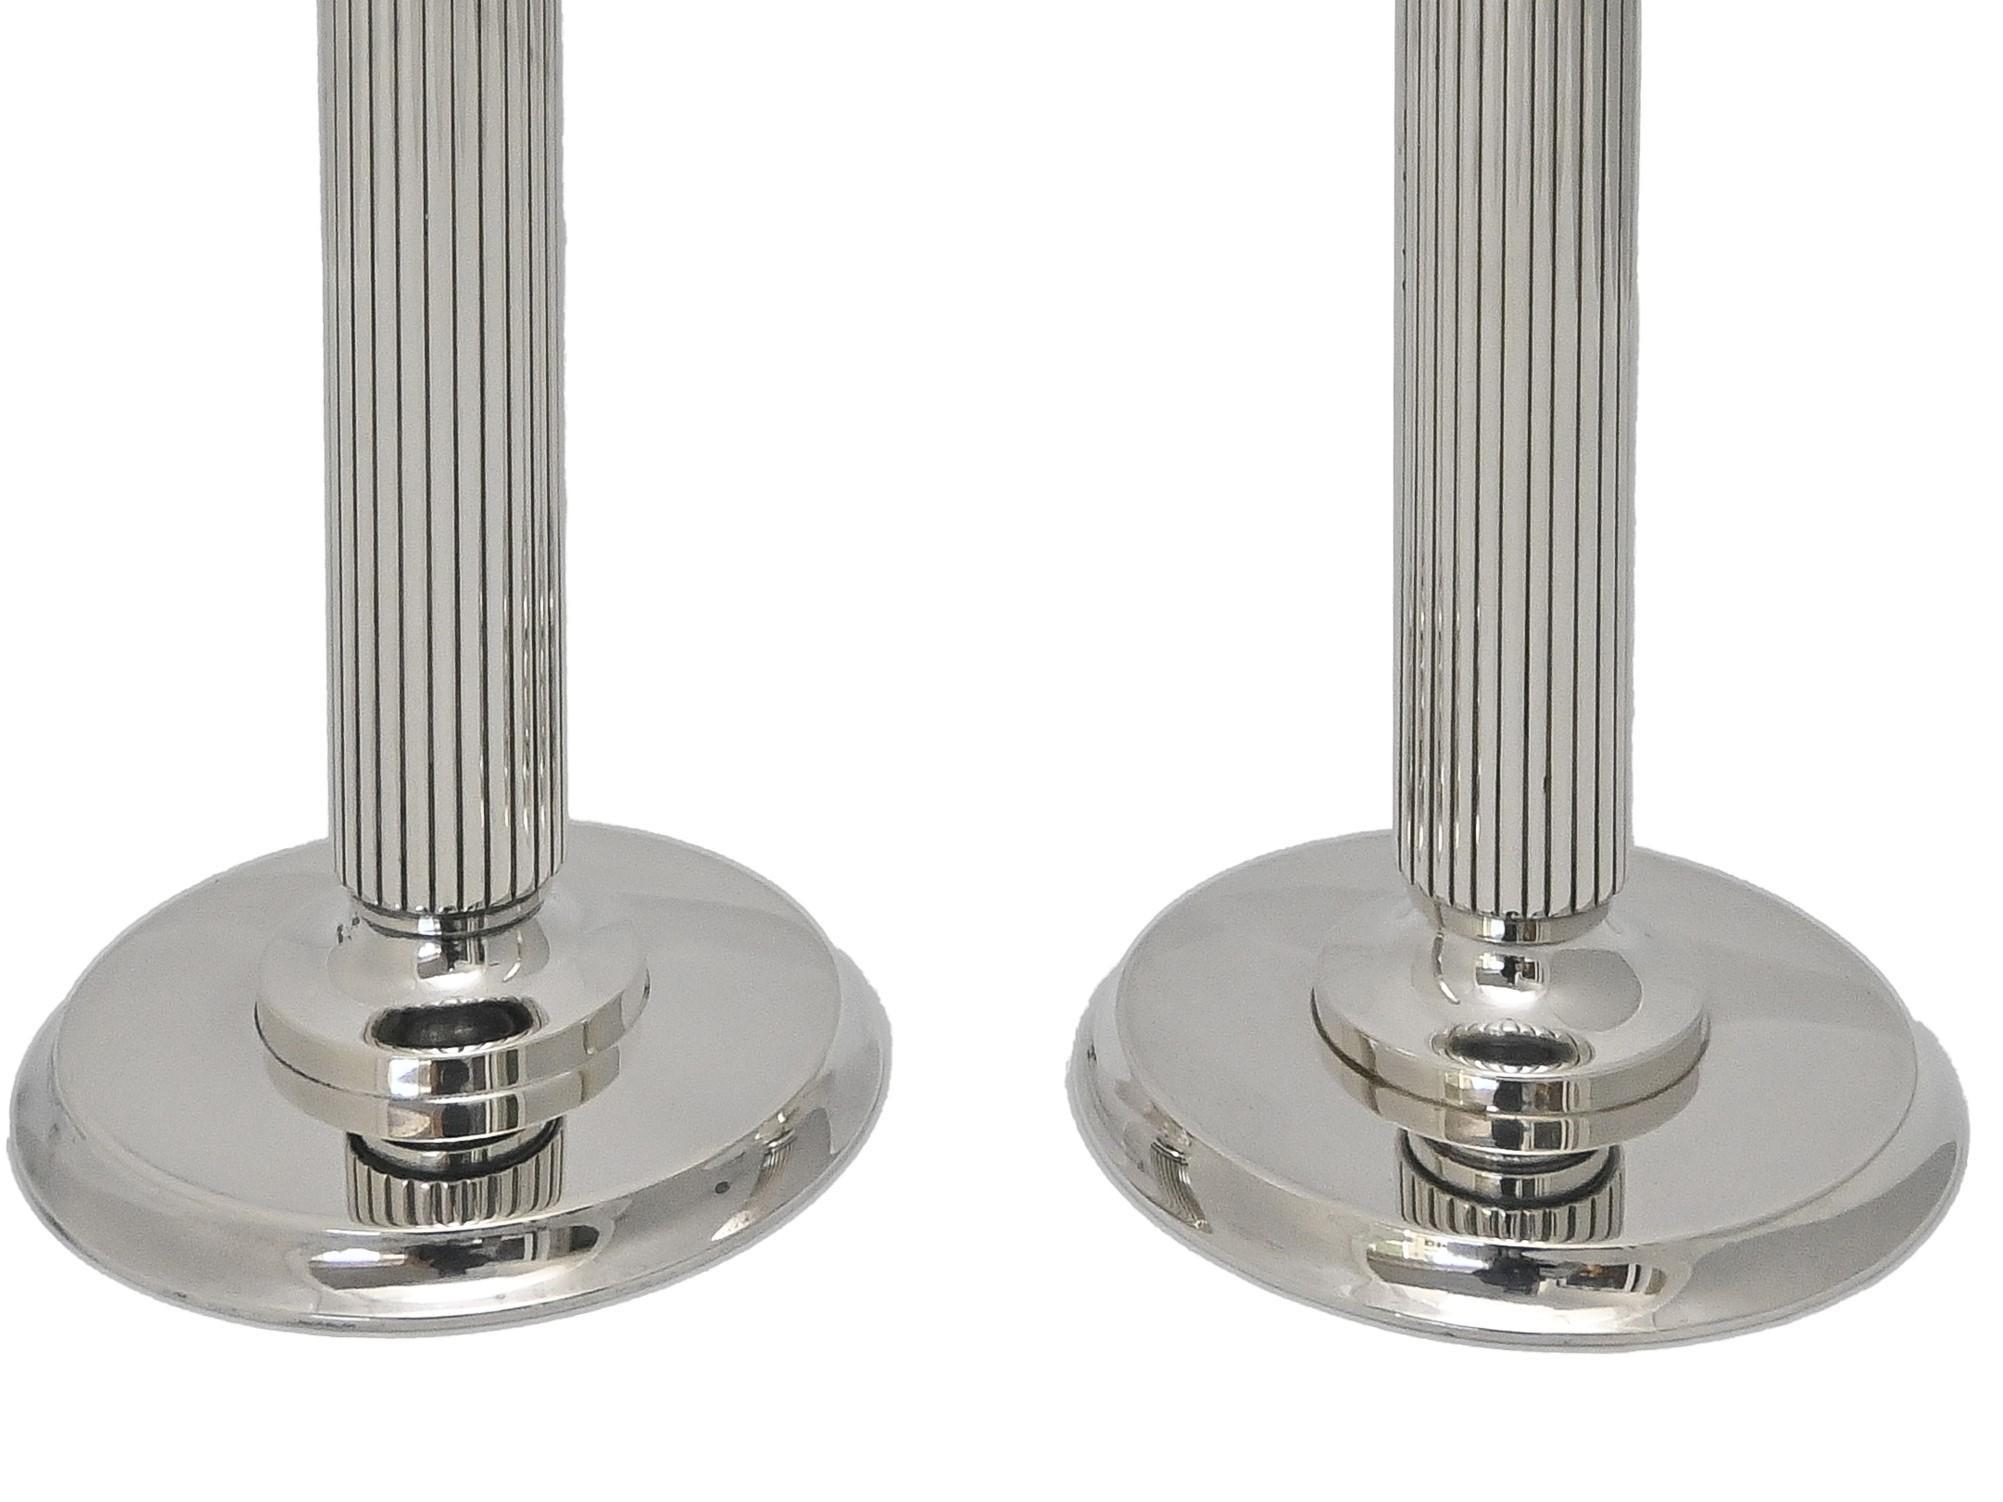 Pair of candlesticks 855 E by Georg Jensen Denmark , design Prince Sigvard Bernadotte  
The straight design and particular style, without any other decorations than the lines of the ribs shows Sigvard Bernadotte as one of the first modern designers